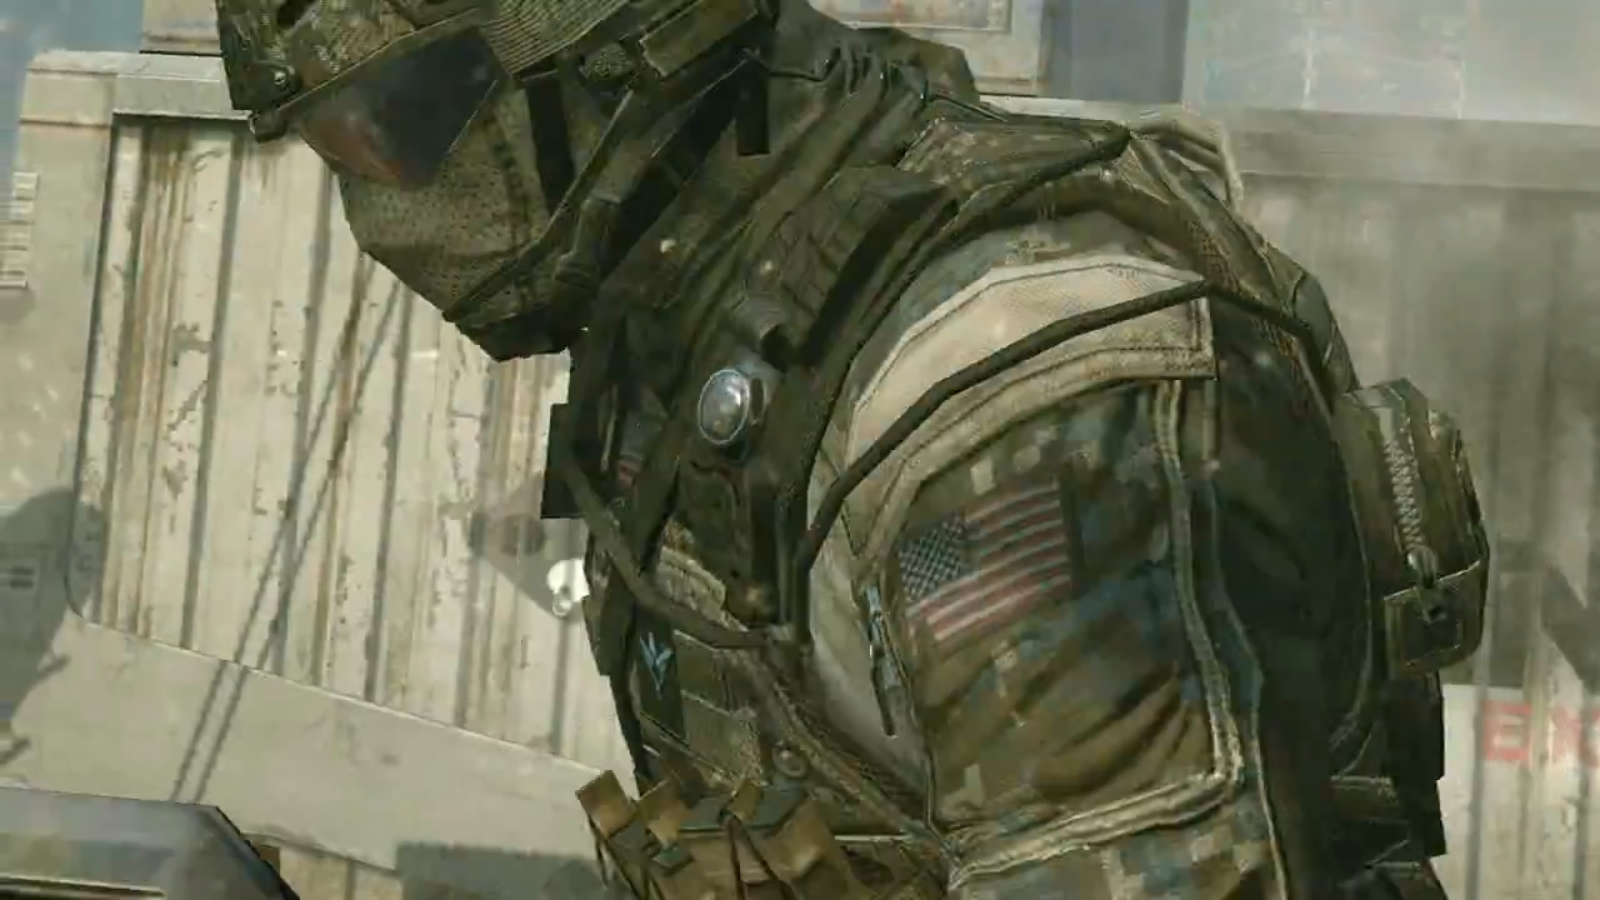 image-call-of-duty-black-ops-ii-multiplayer-trailer-screenshot-47-png-call-of-duty-wiki